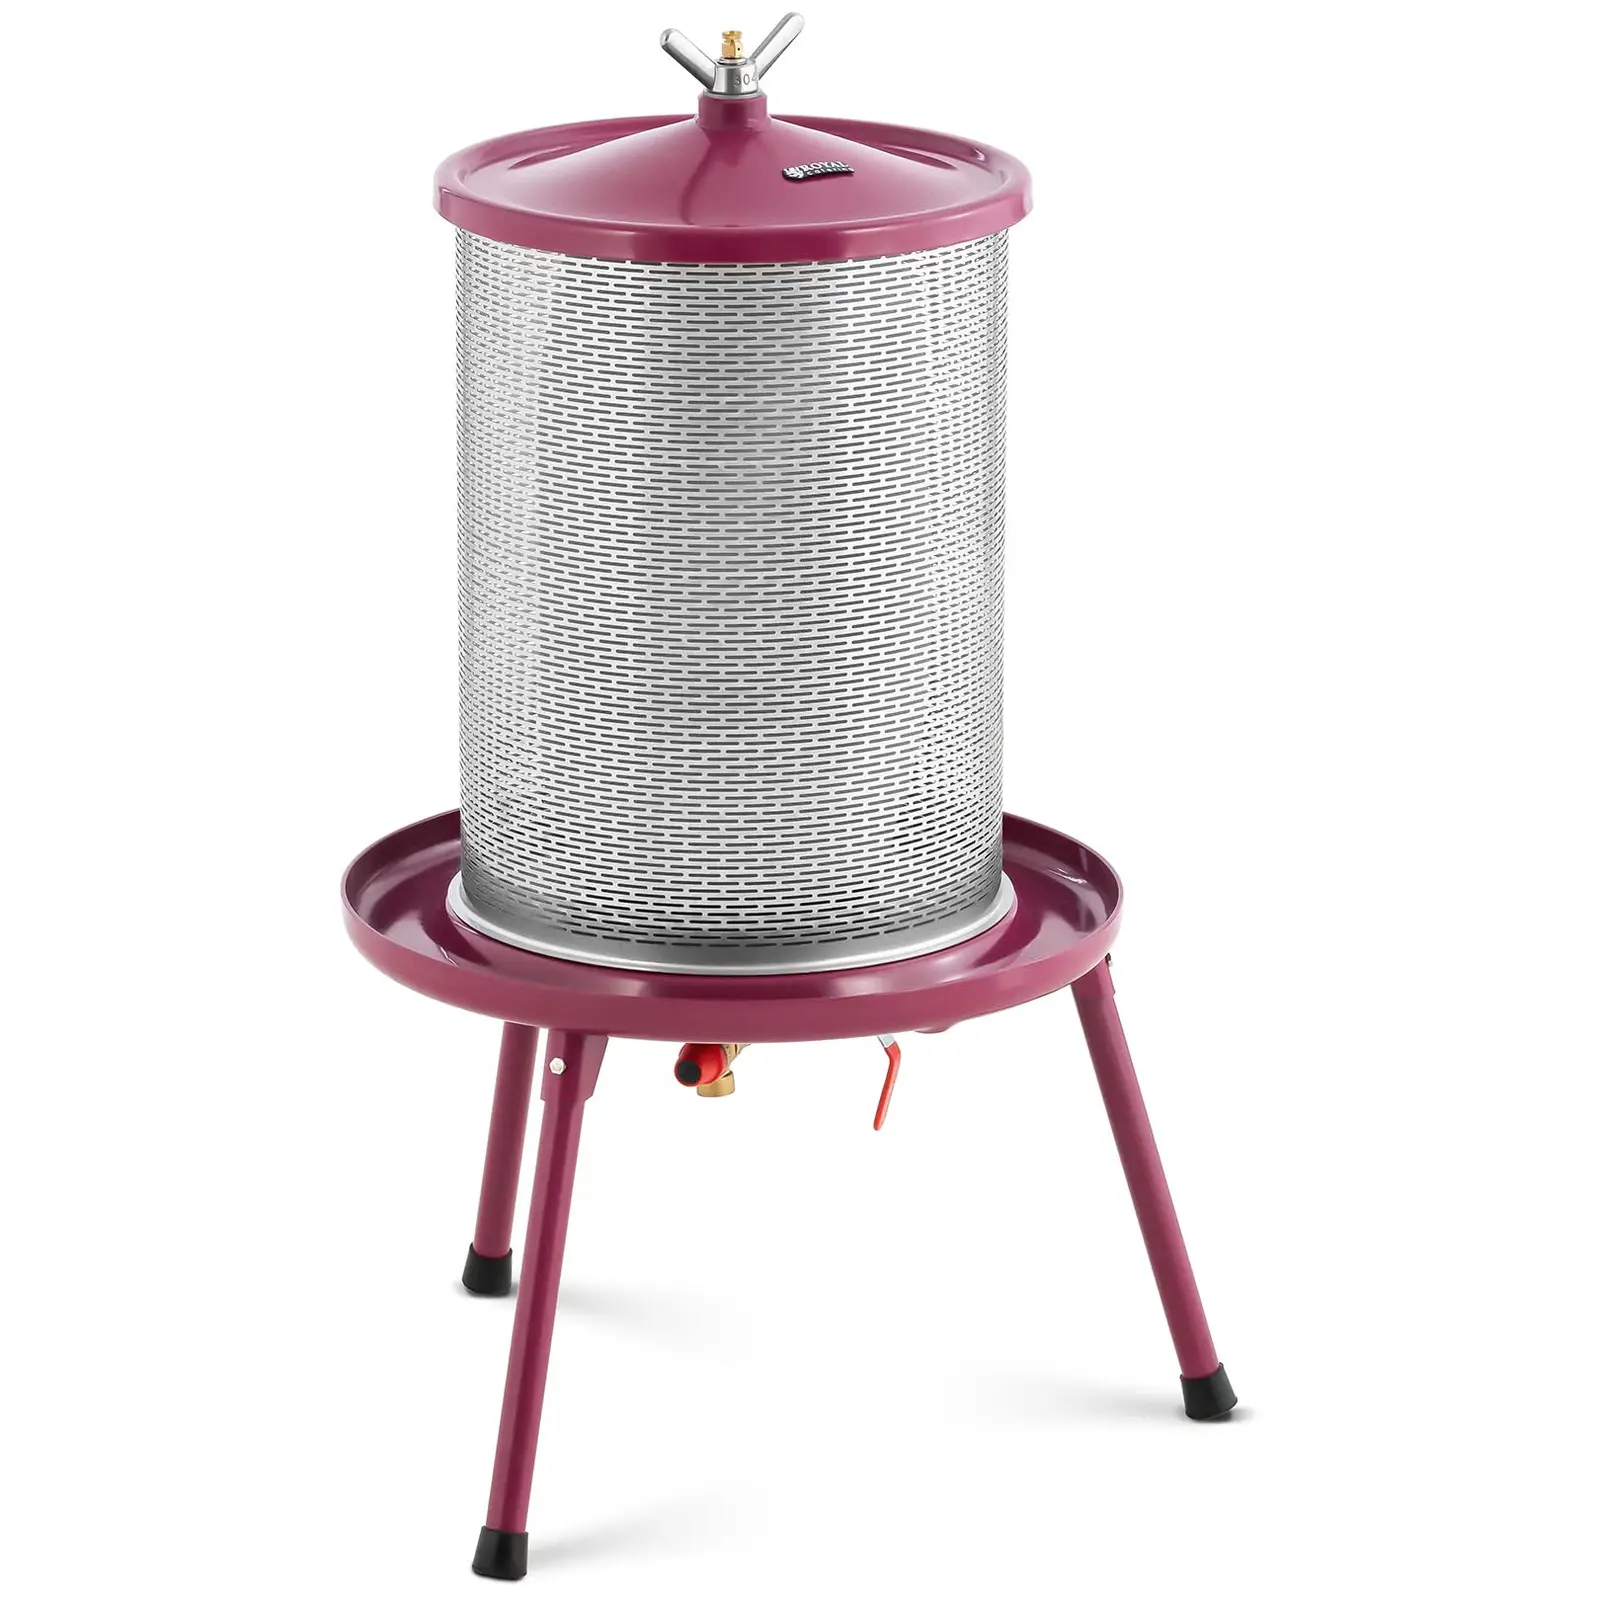 Wine Press - stainless steel/iron - 40 l - 3 bar - incl. 5 muslin cloths - Royal Catering